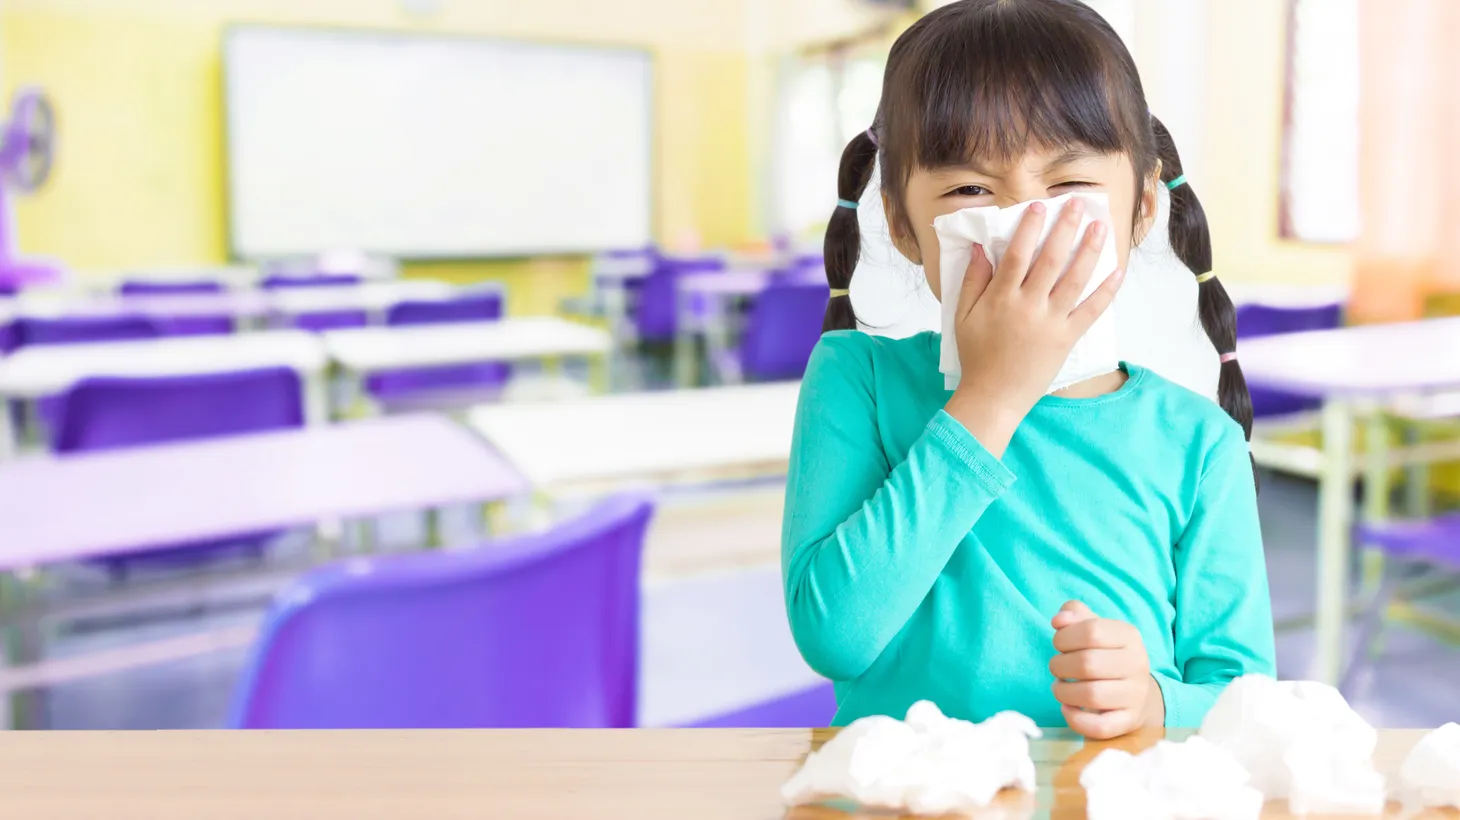 “If your child has a mild runny nose or cold symptoms that are not bothering them, and they test negative for COVID-19, send them to school,” the new LAUSD health guidance reads.